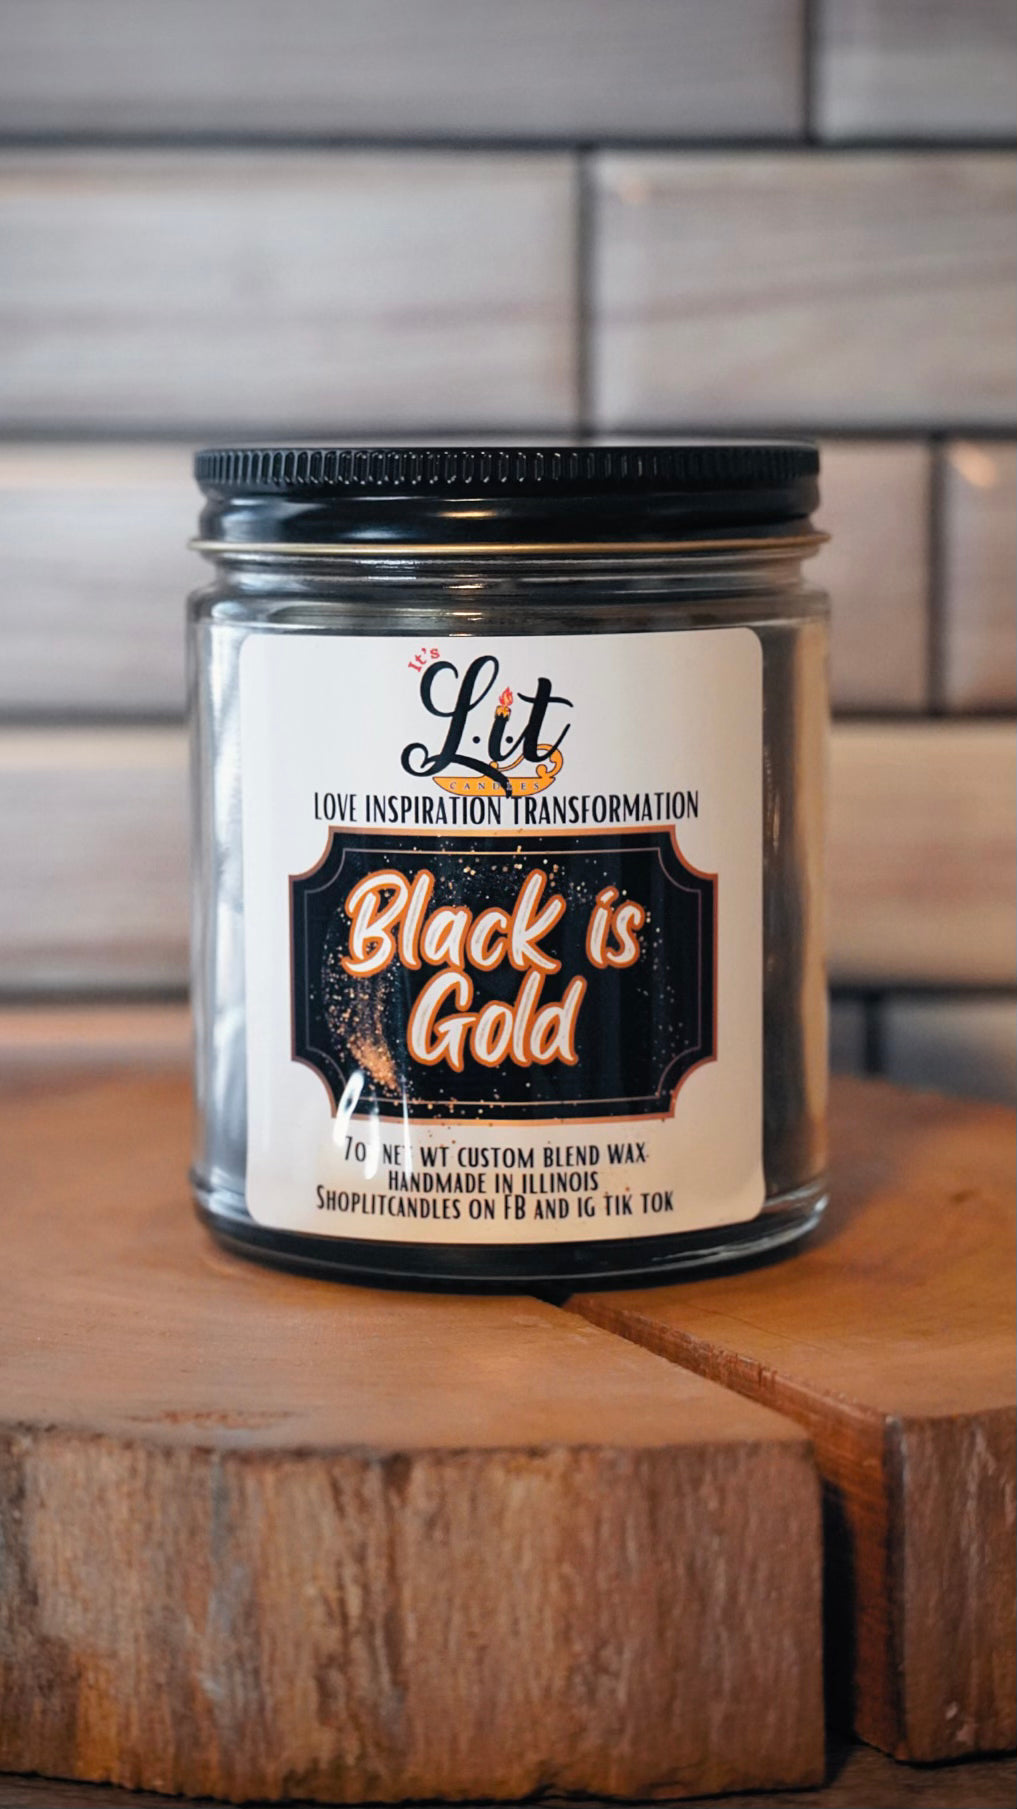 Black ice type scent:handmade candle, favorite for men – Shop